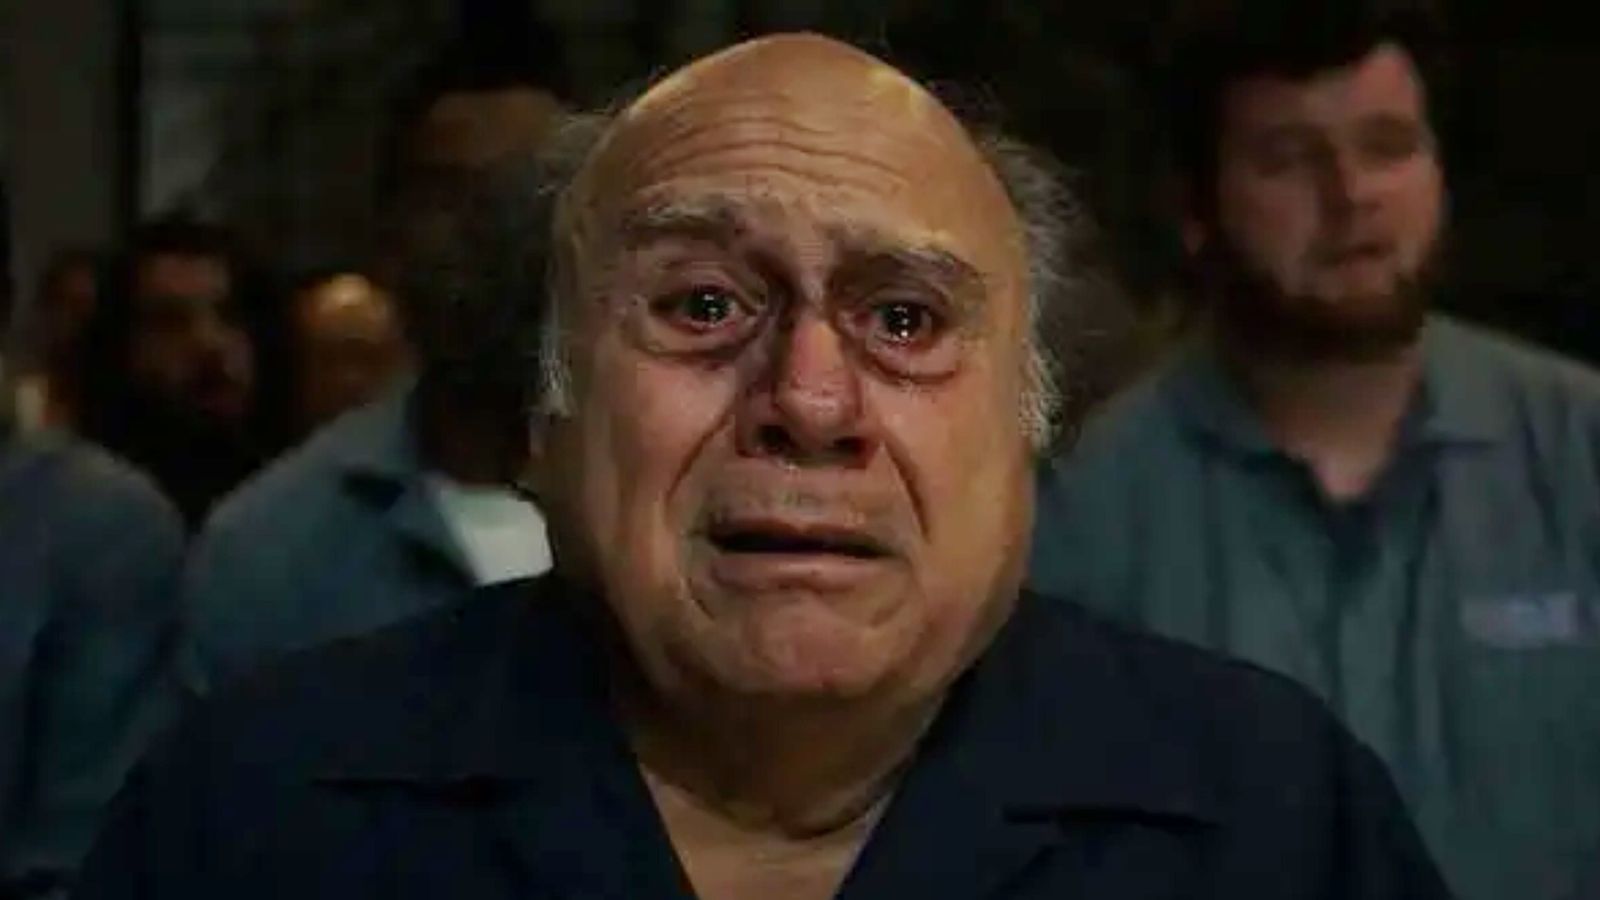 Danny DeVito with a very beaten up face having an epiphany 